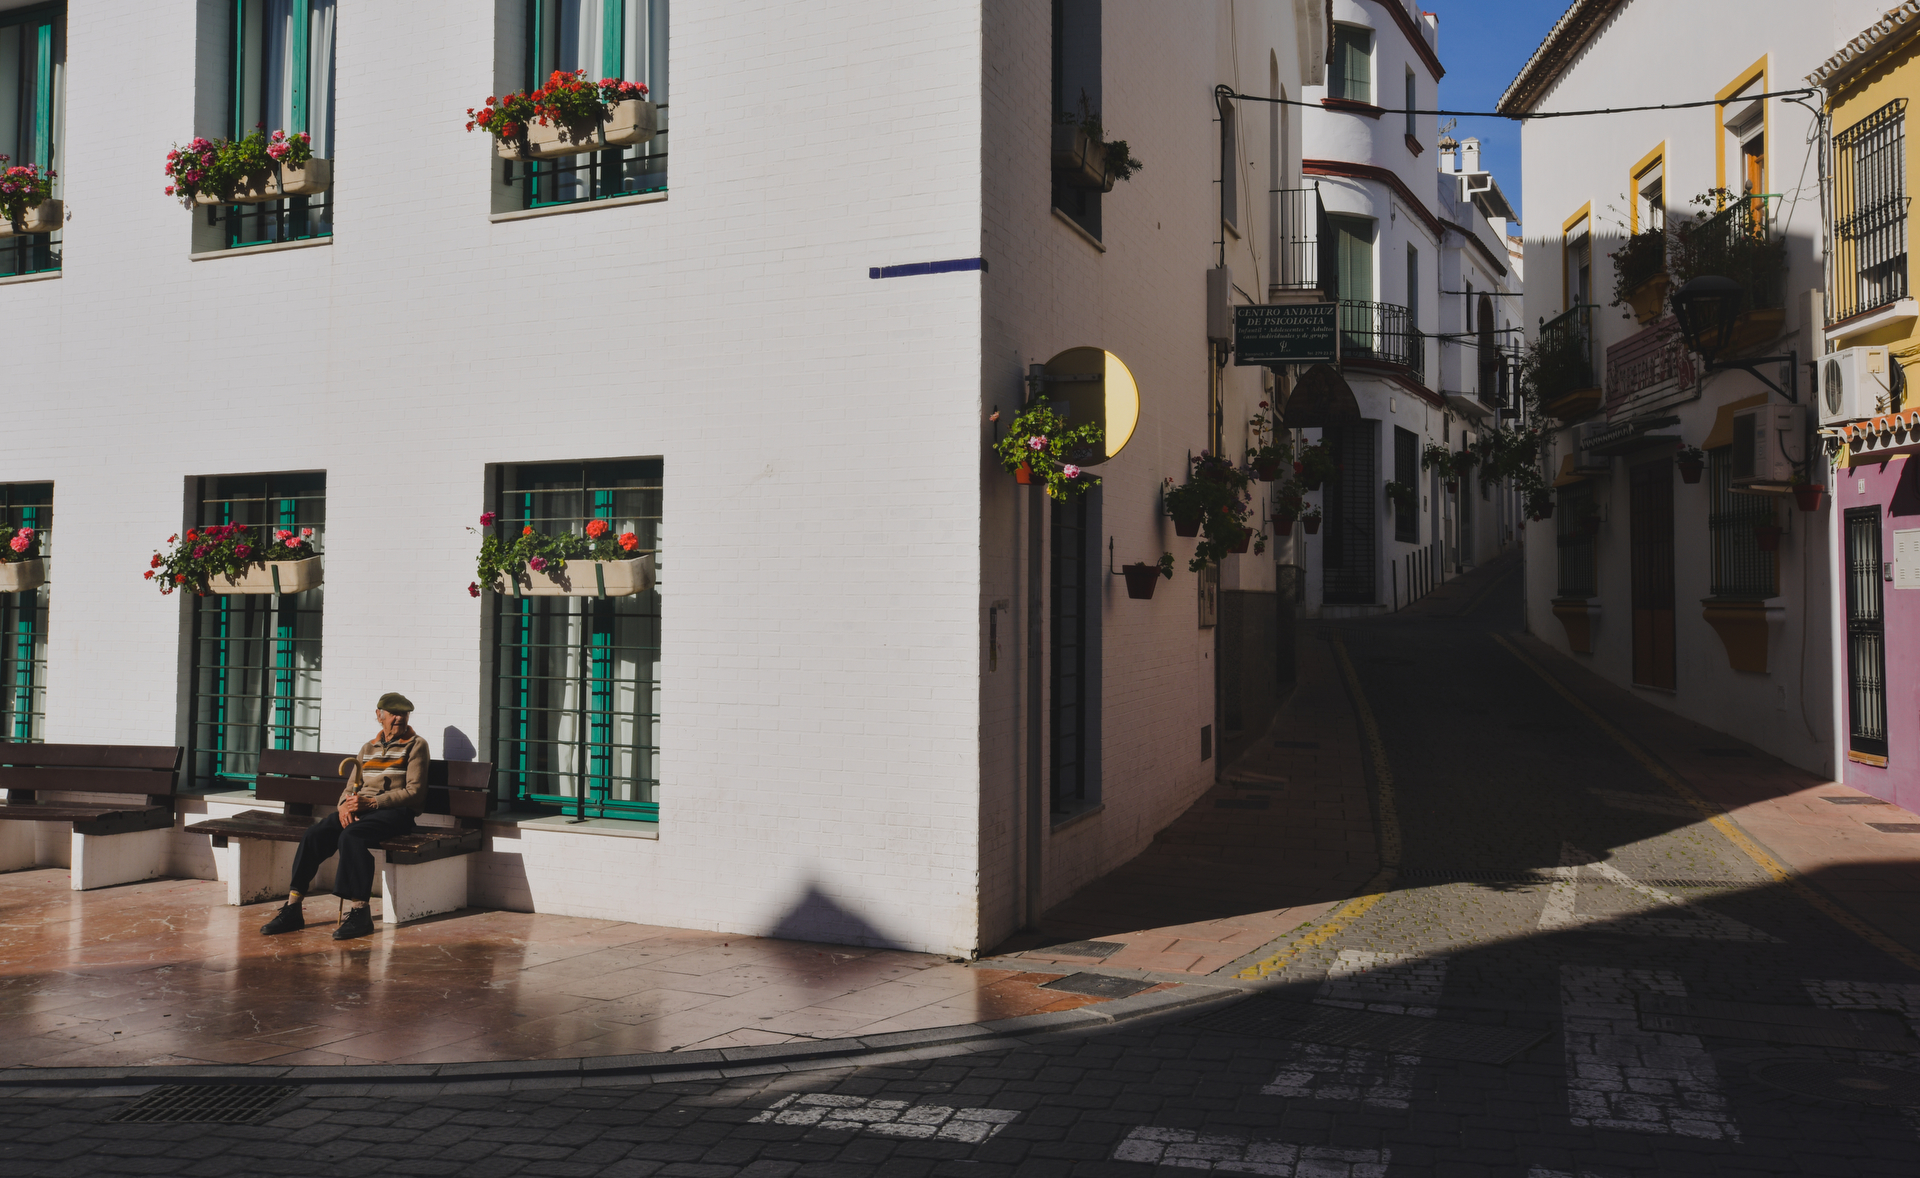 Photojournal: Romance in Andalusia